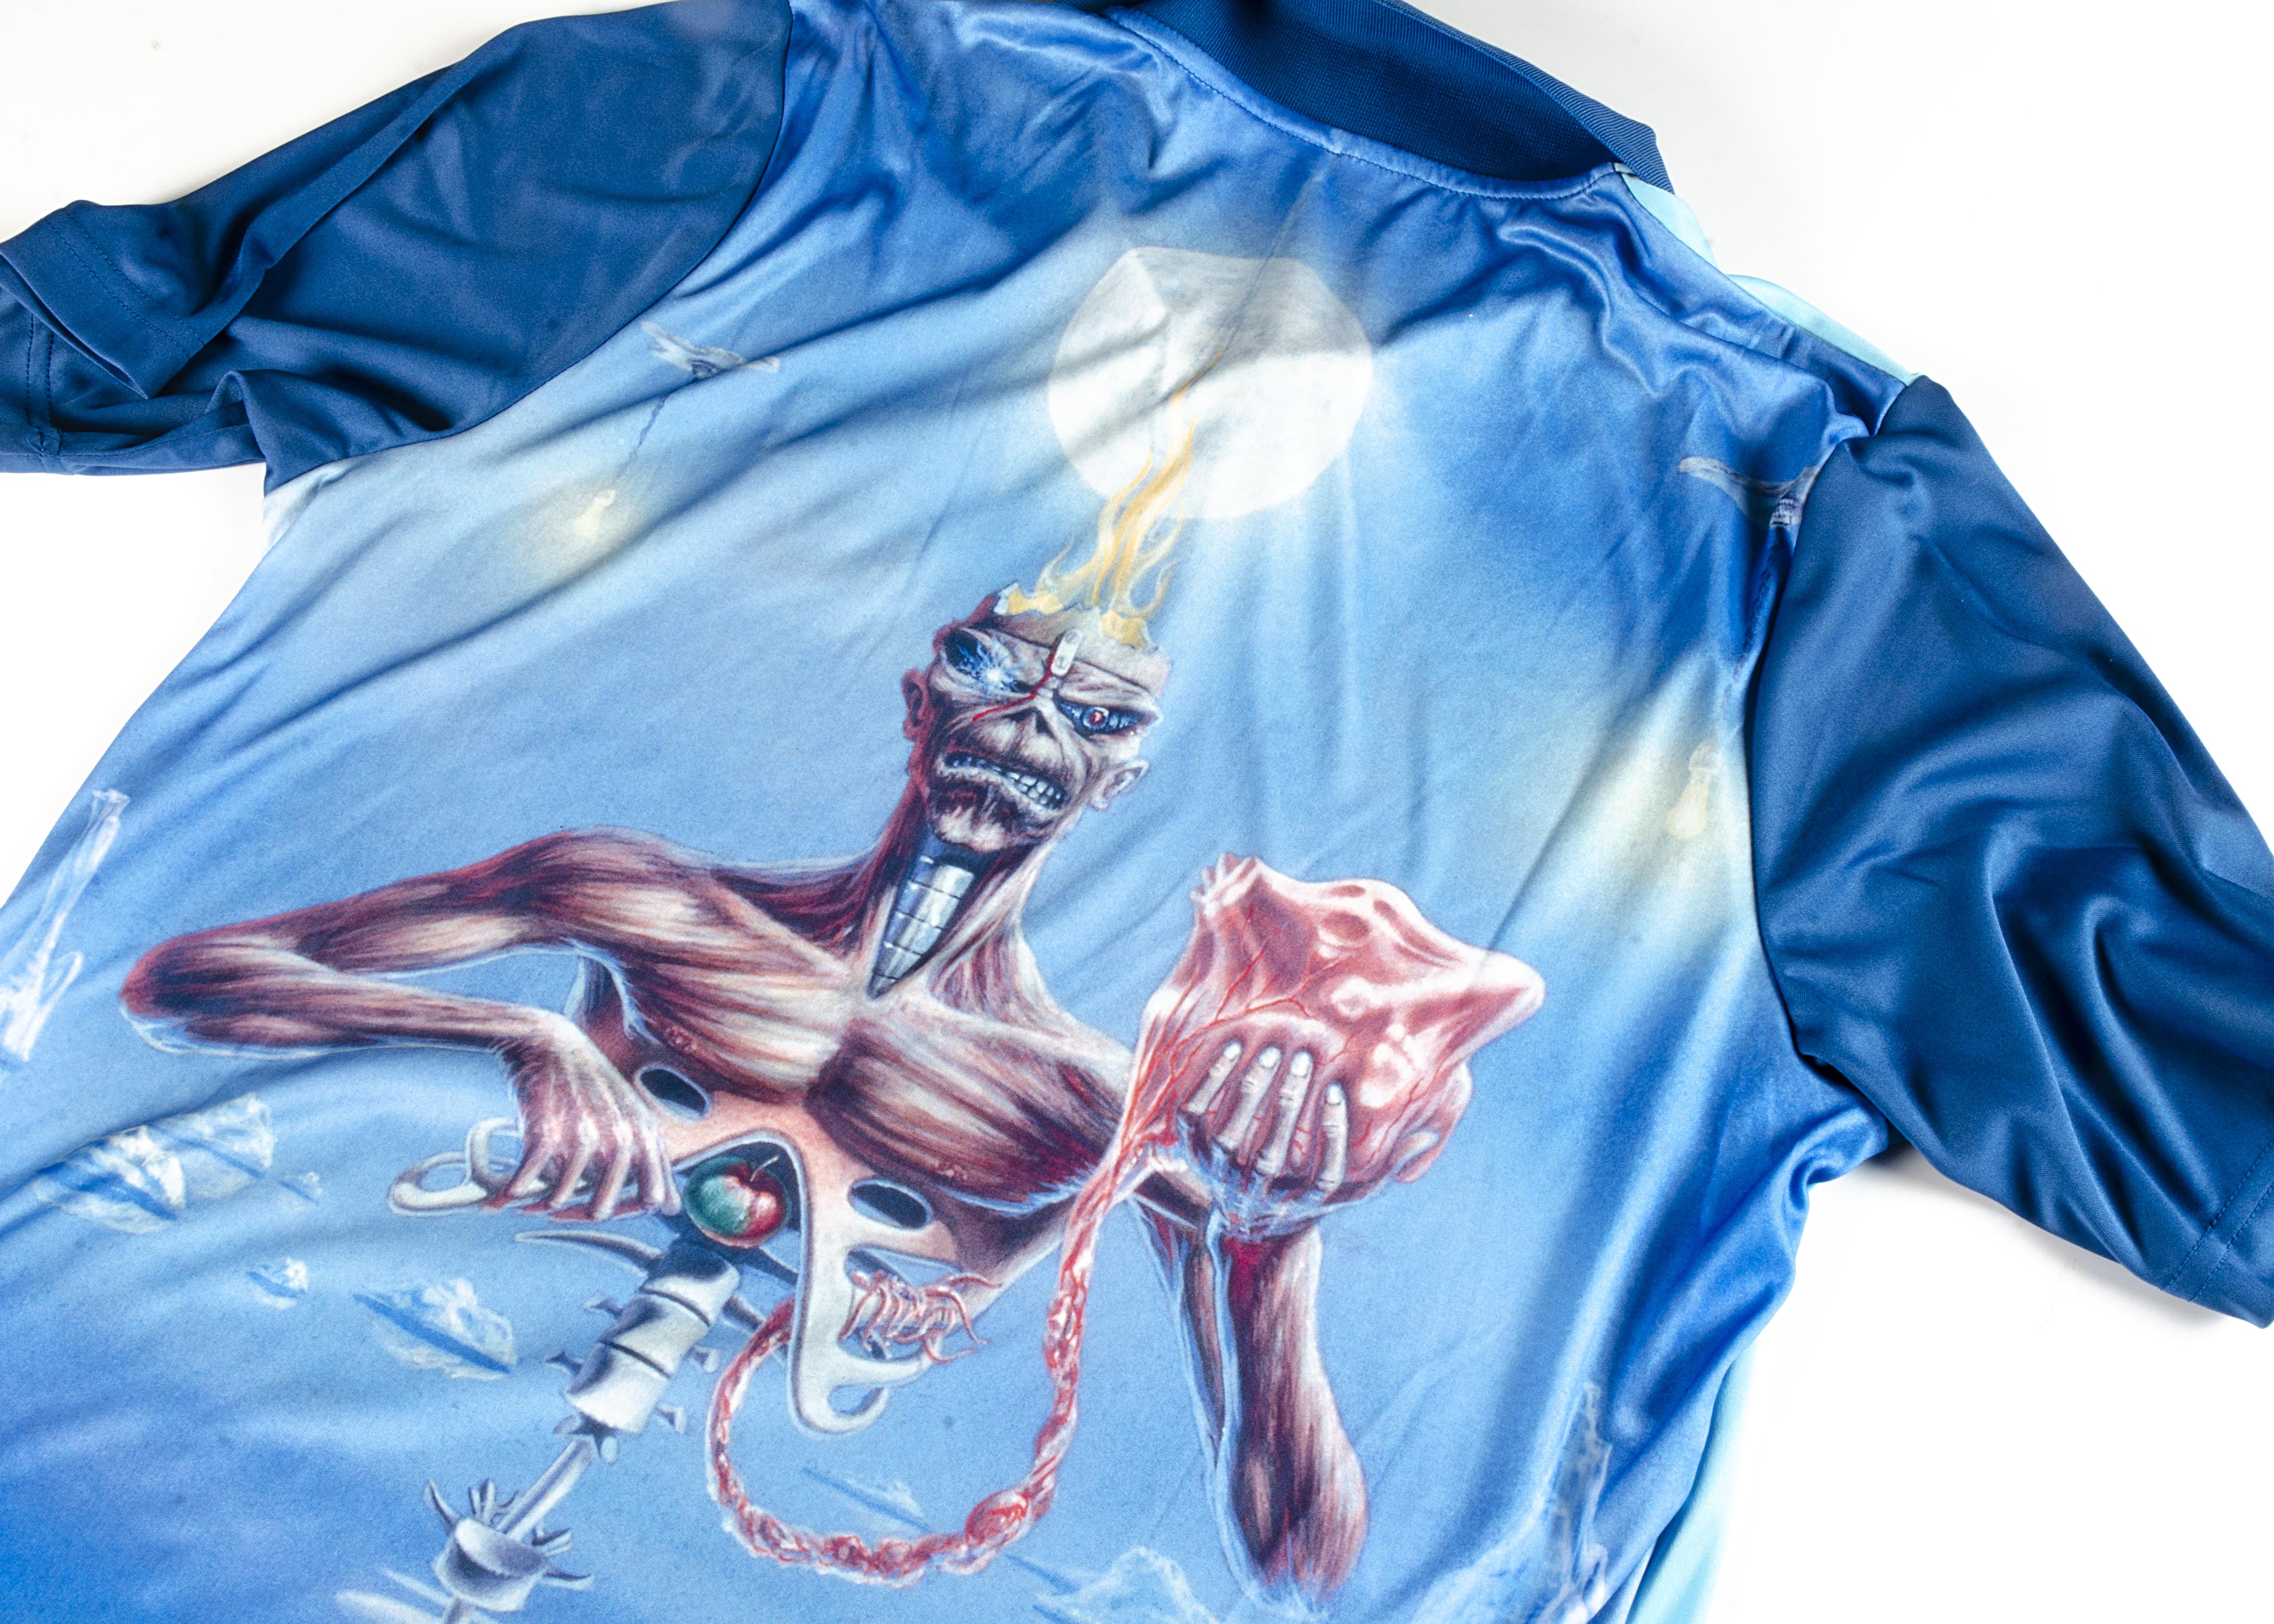 Iron Maiden 'Seventh Son of Seventh Son' Football Shirt, a light and dark blue Iron Maiden - Image 2 of 2